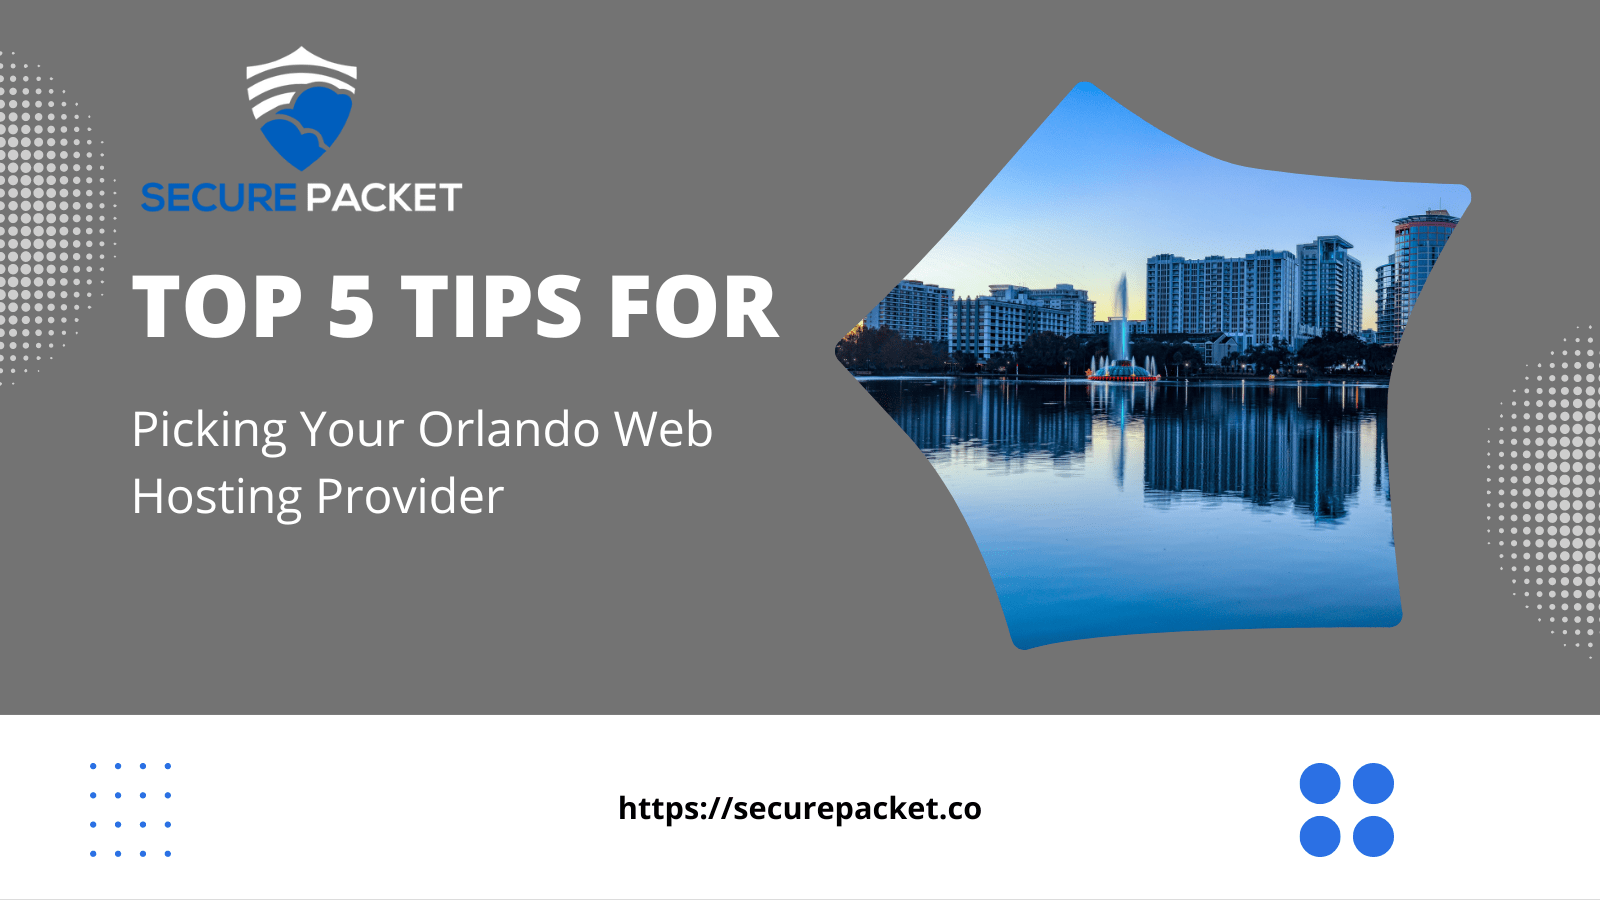 Top 5 tips for picking your Orlando web hosting provider